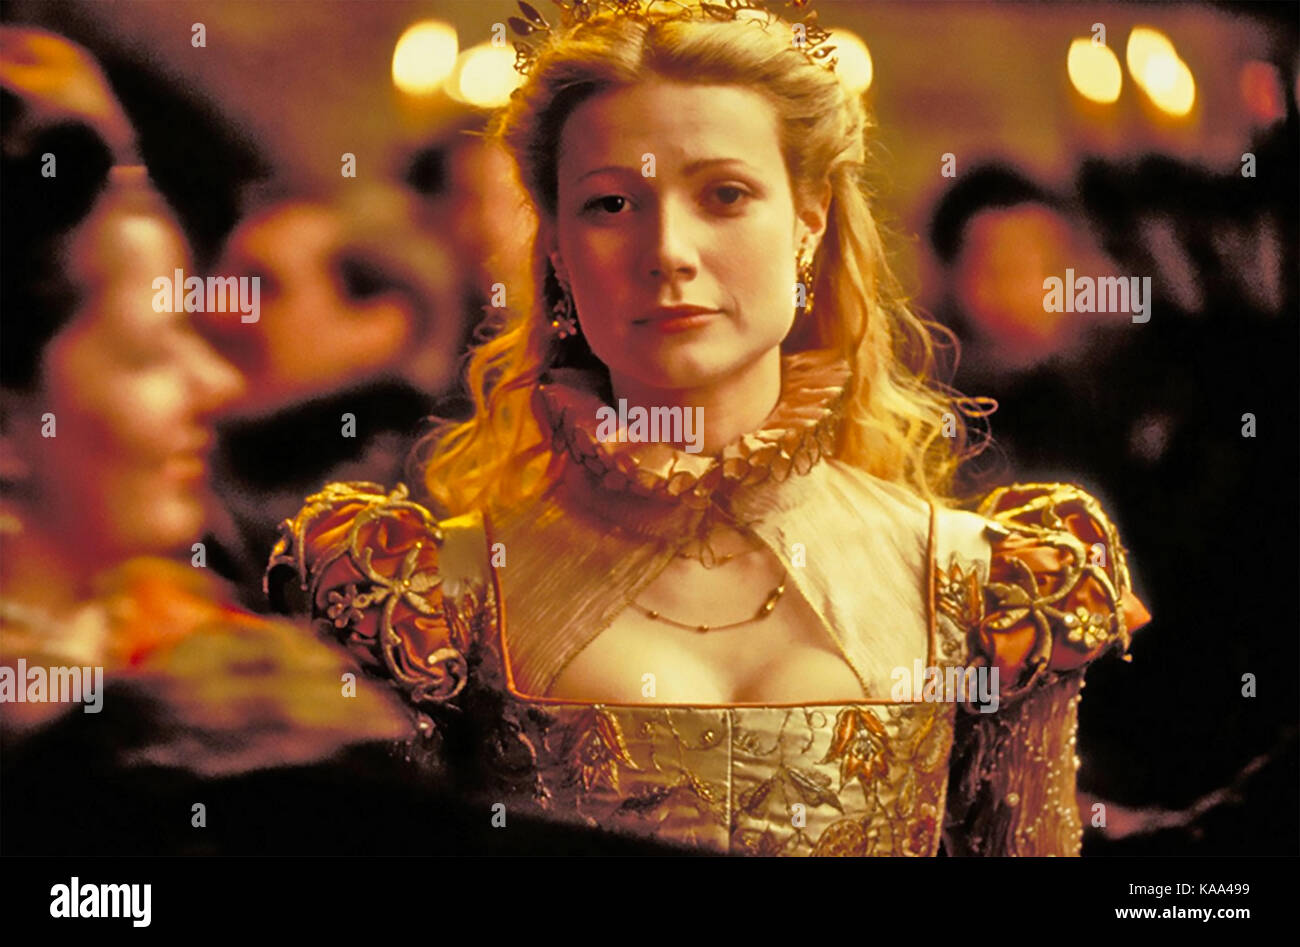 SHAKESPEARE IN LOVE 1998 Universal Pictures film avec Gwyneth Paltrow Banque D'Images